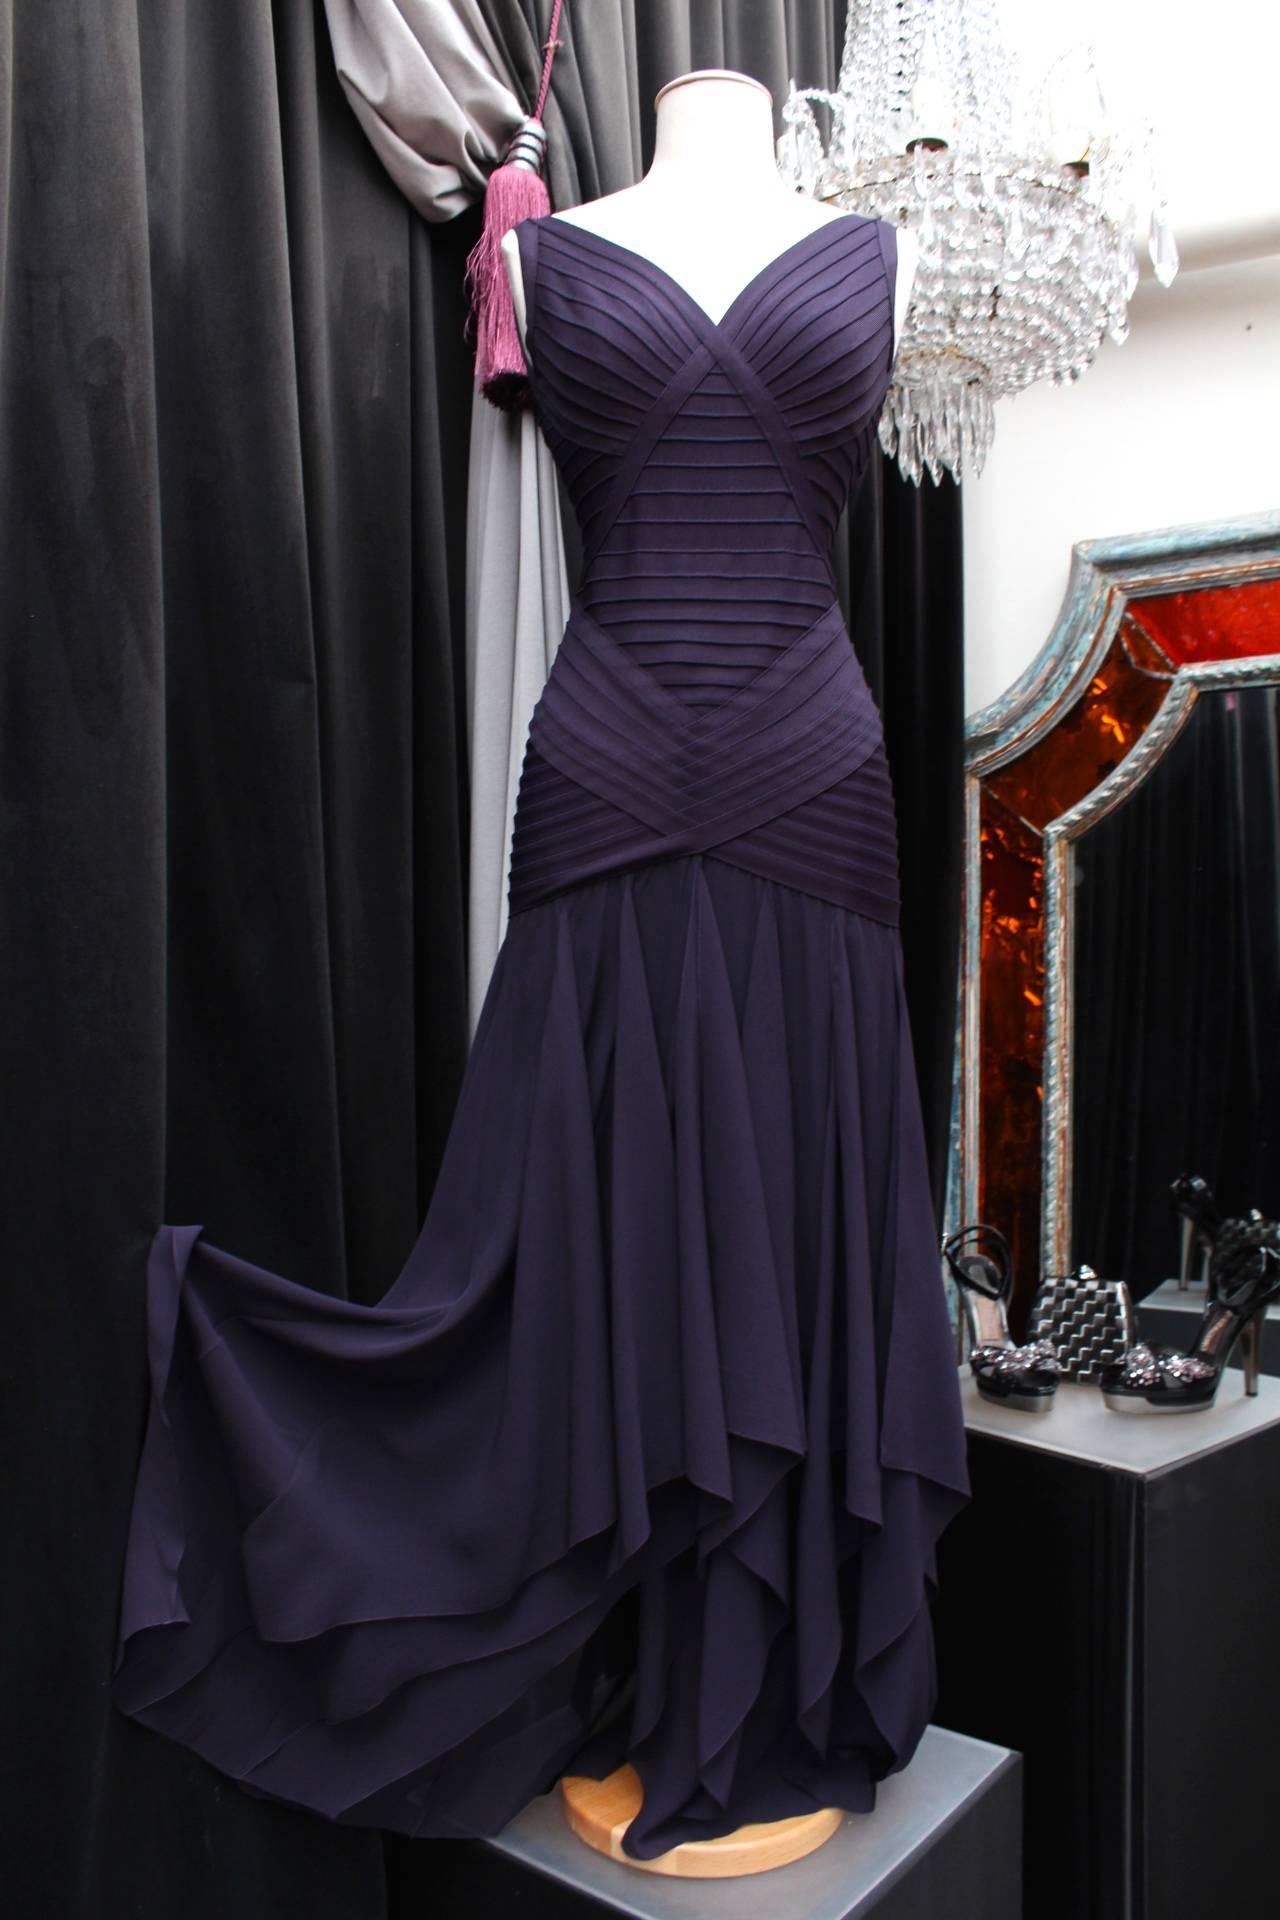 HERVE LEGER COUTURE (Made in France) Beautiful evening gown in purple rayon and pleated silk muslin frills. 

The dress is constructed with a top with a V neck and straps. It closes with a zip in the back. 

Extremely sexy dress designed by